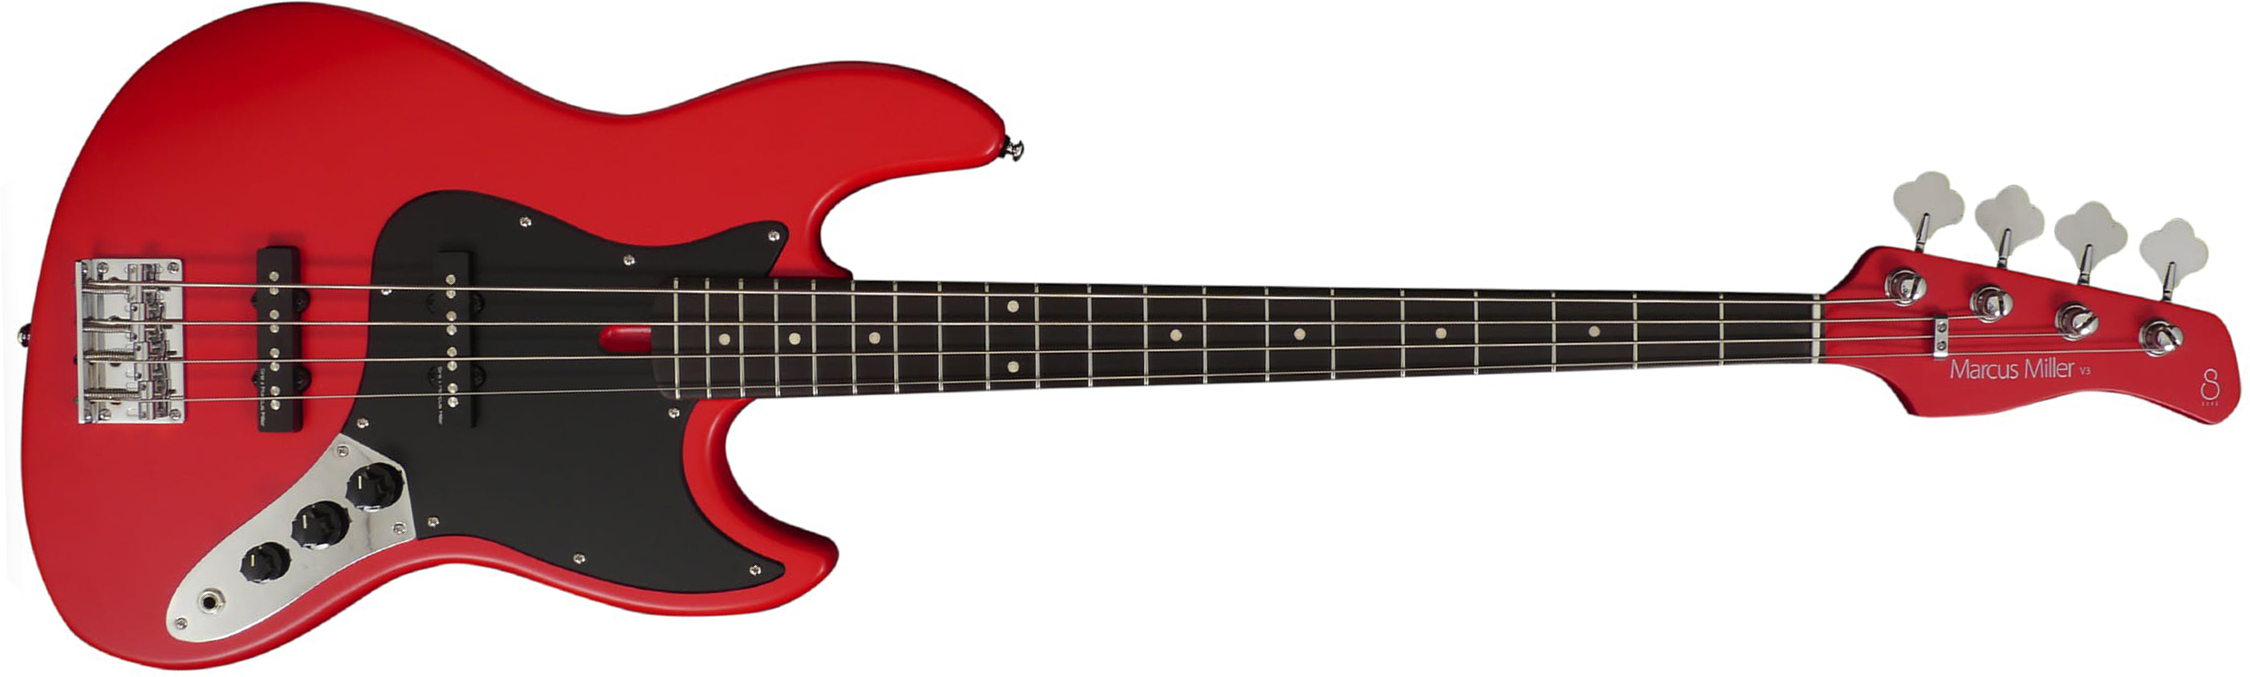 Marcus Miller V3p 4st Rw - Red Satin - Basse Électrique Solid Body - Main picture